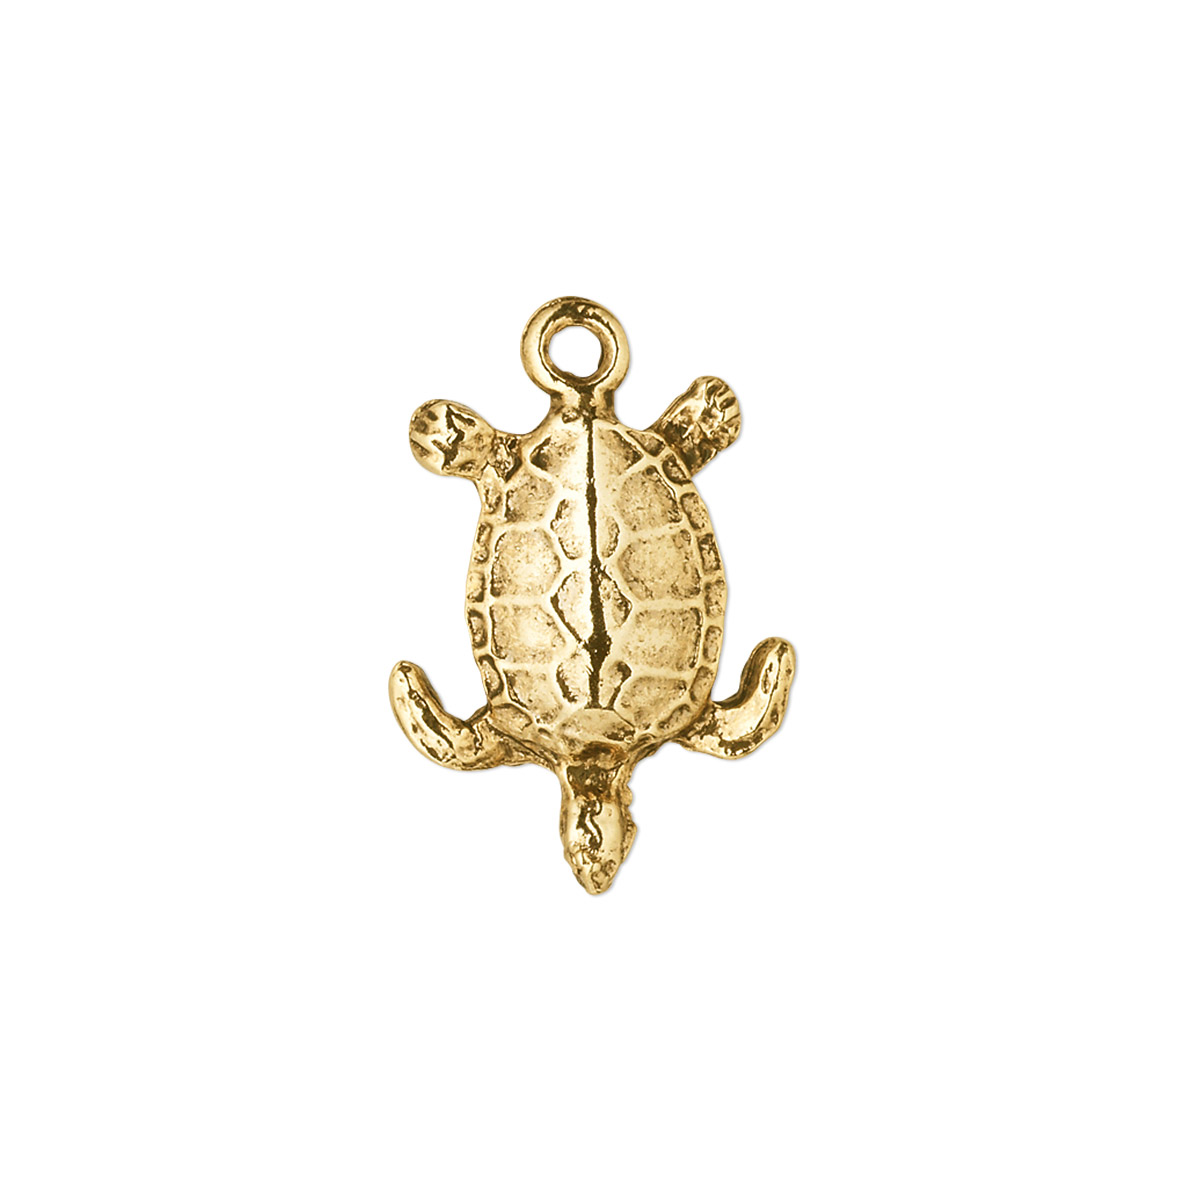 Charm, antique gold-plated pewter (tin-based alloy), 18x15mm single ...